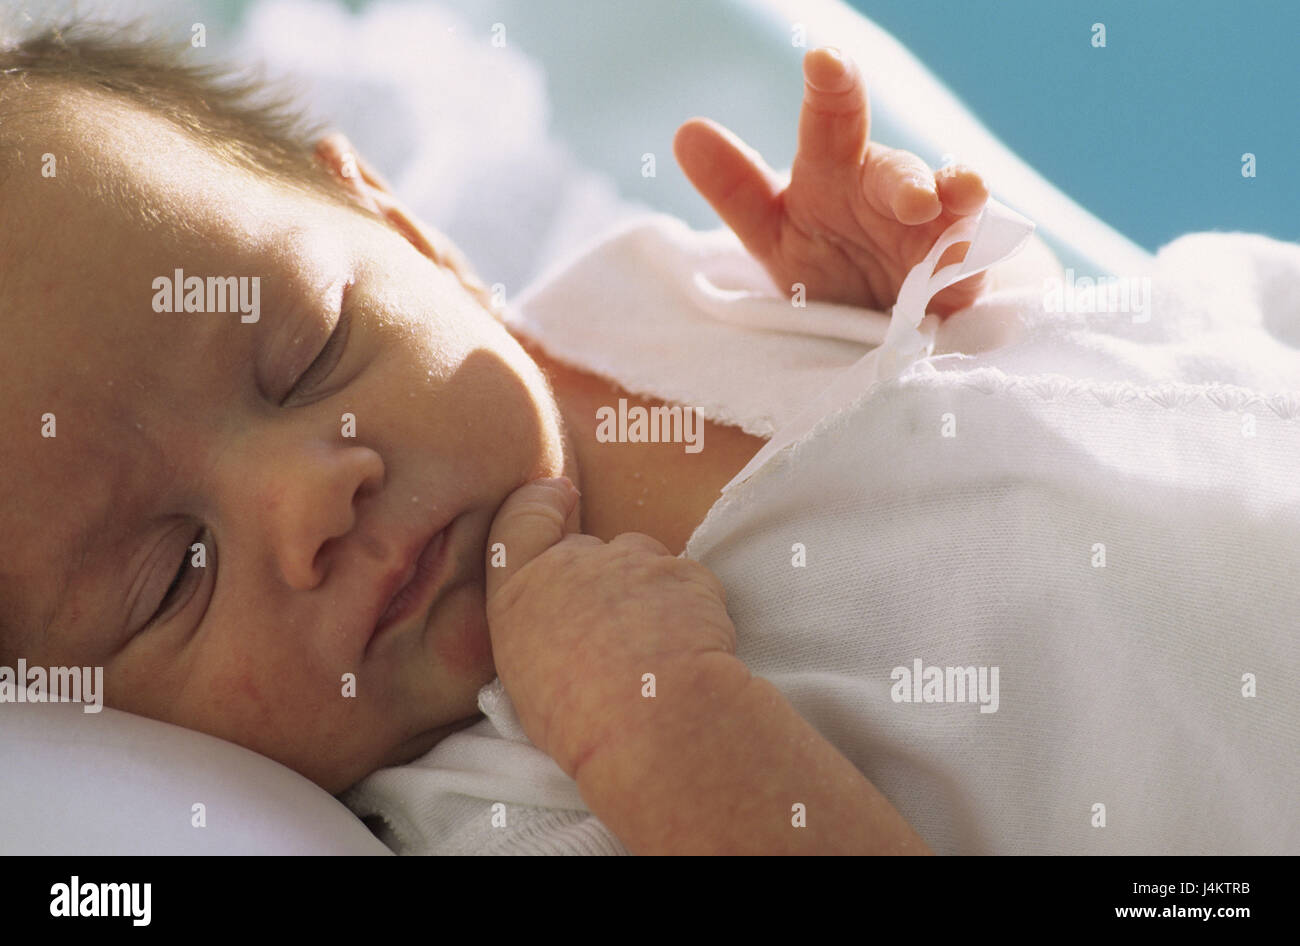 Newborn child, sleep, detail child, small, baby, infant, look, hands, lie, rest back position, fallen asleep, dream, peacefully, softly, vulnerable, curled, inside, conception, childhood, fatigue, détente, sleep, after-lunch sleep, rest, security, innocence, Stock Photo